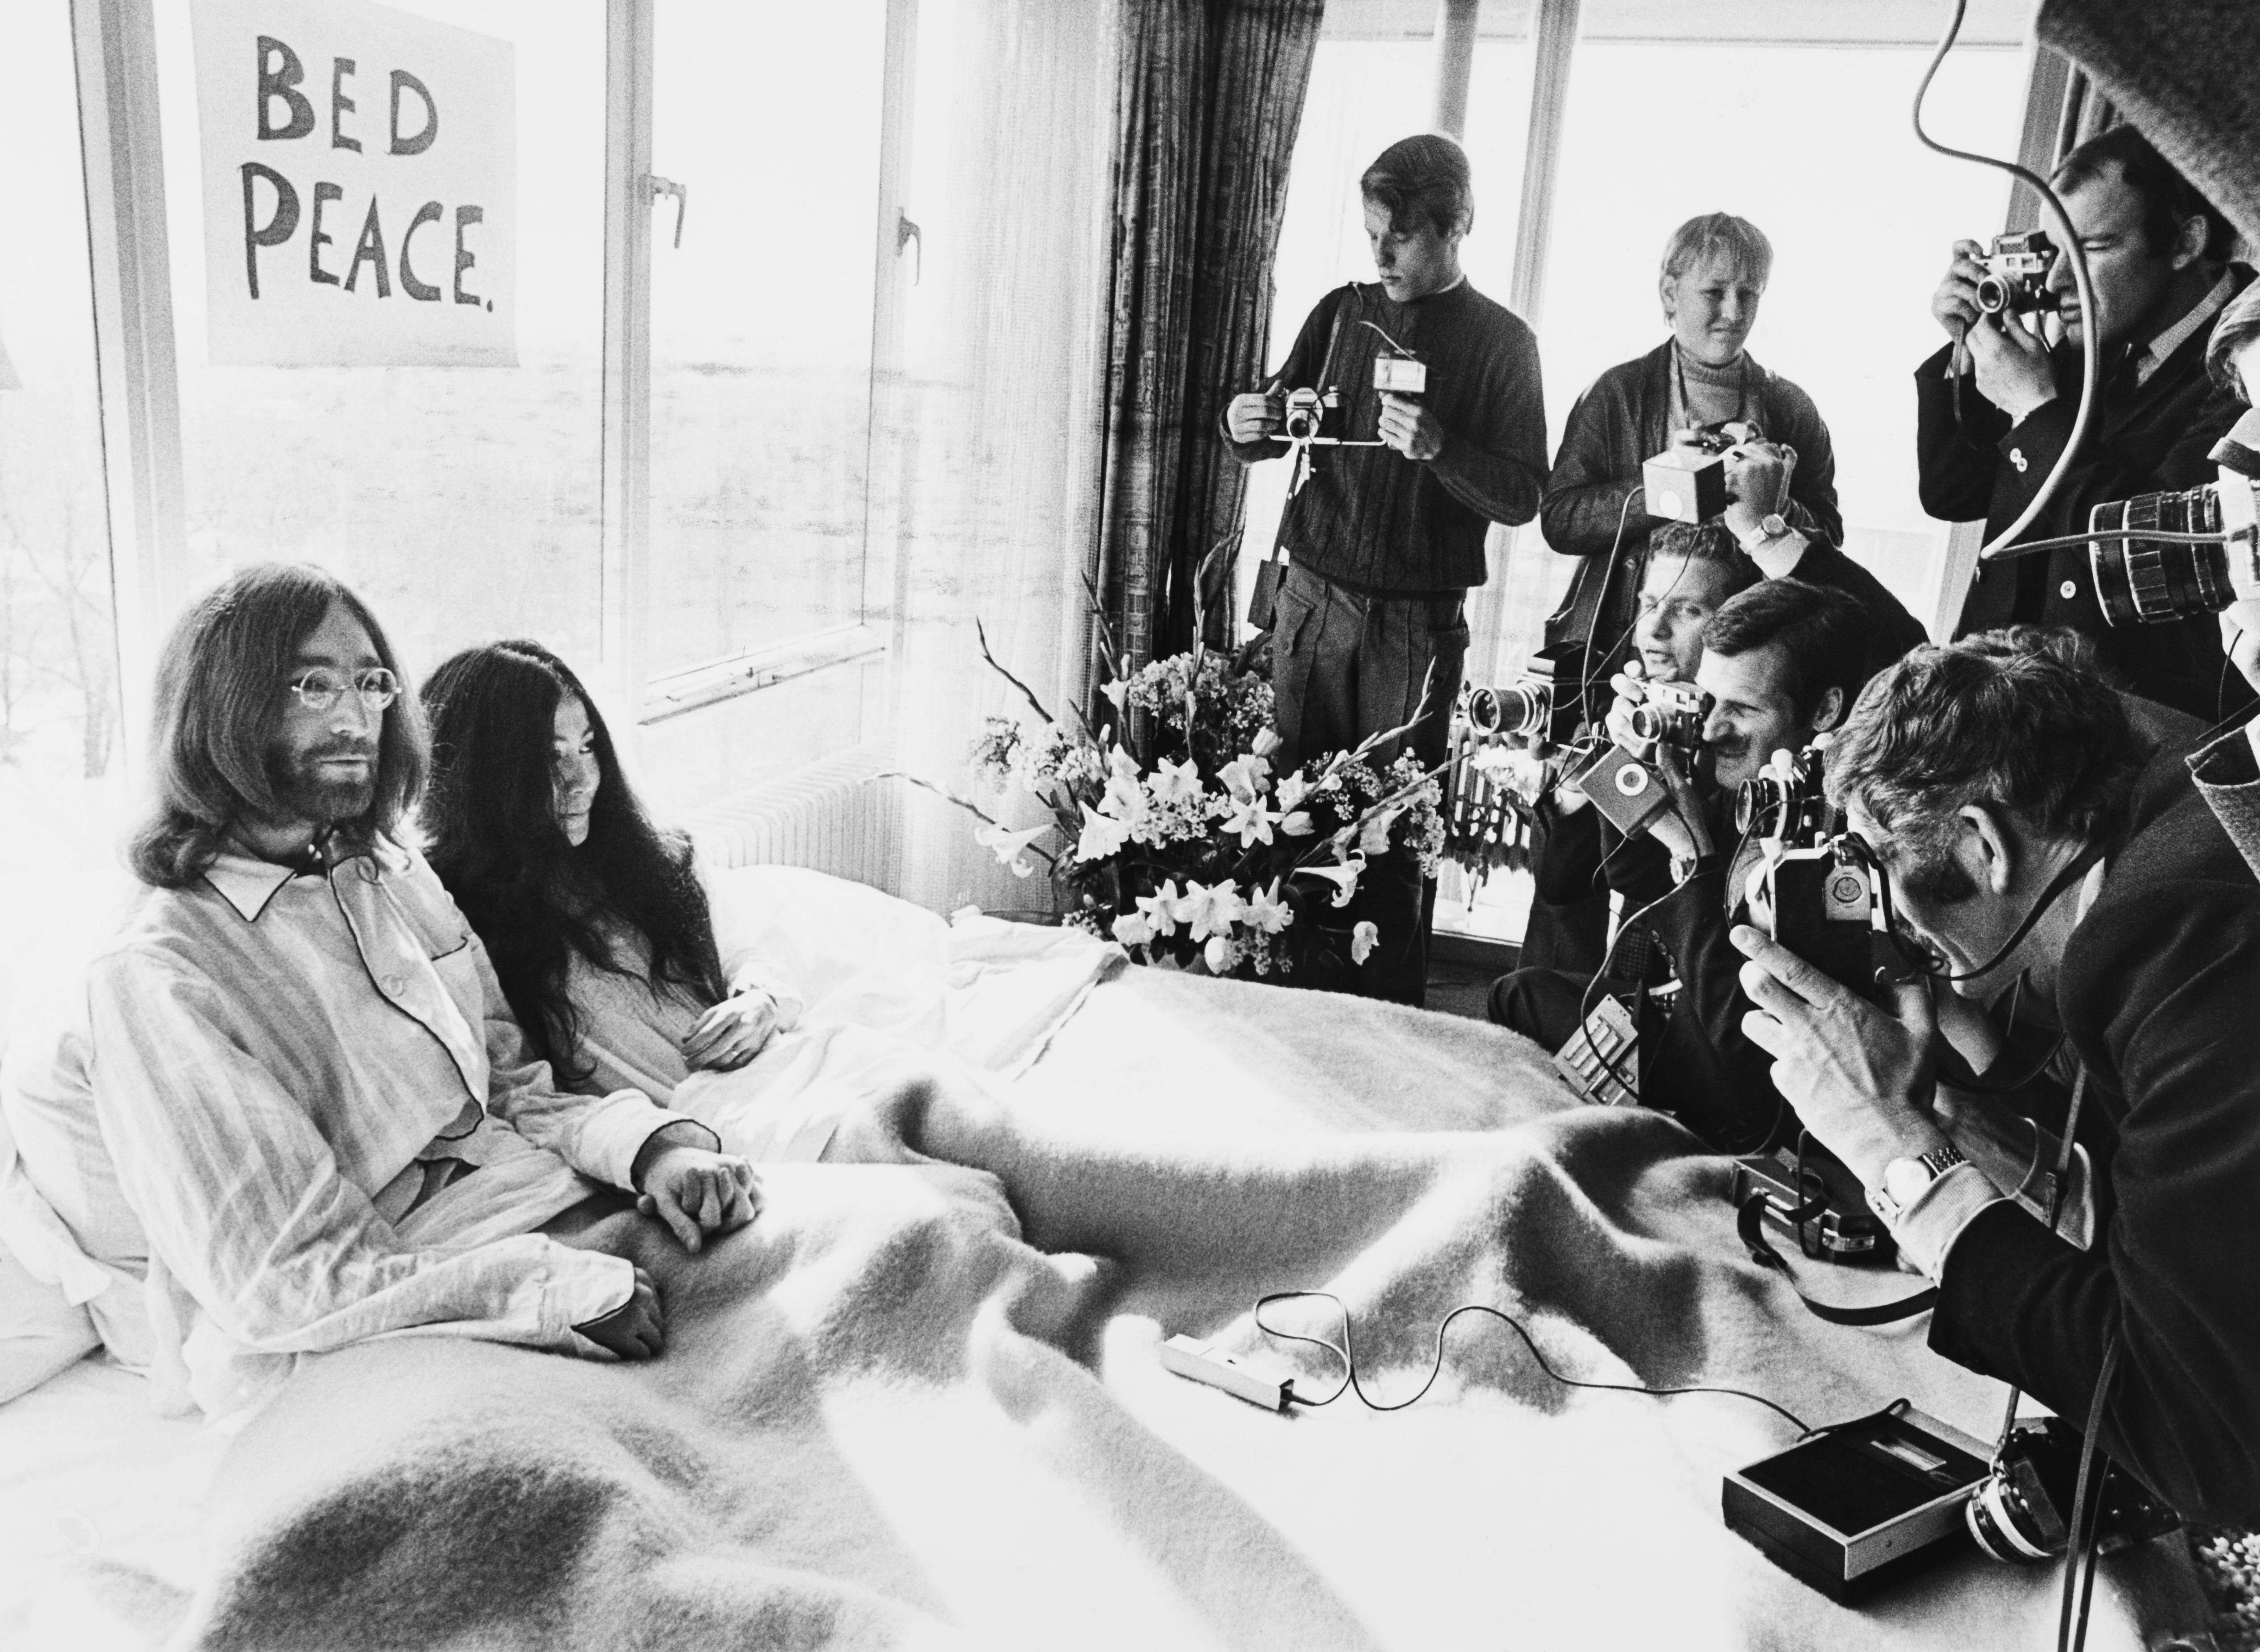 John Lennon and Yoko Ono at Amsterdam Hilton during their Bed-in for Peace event, March 1969 